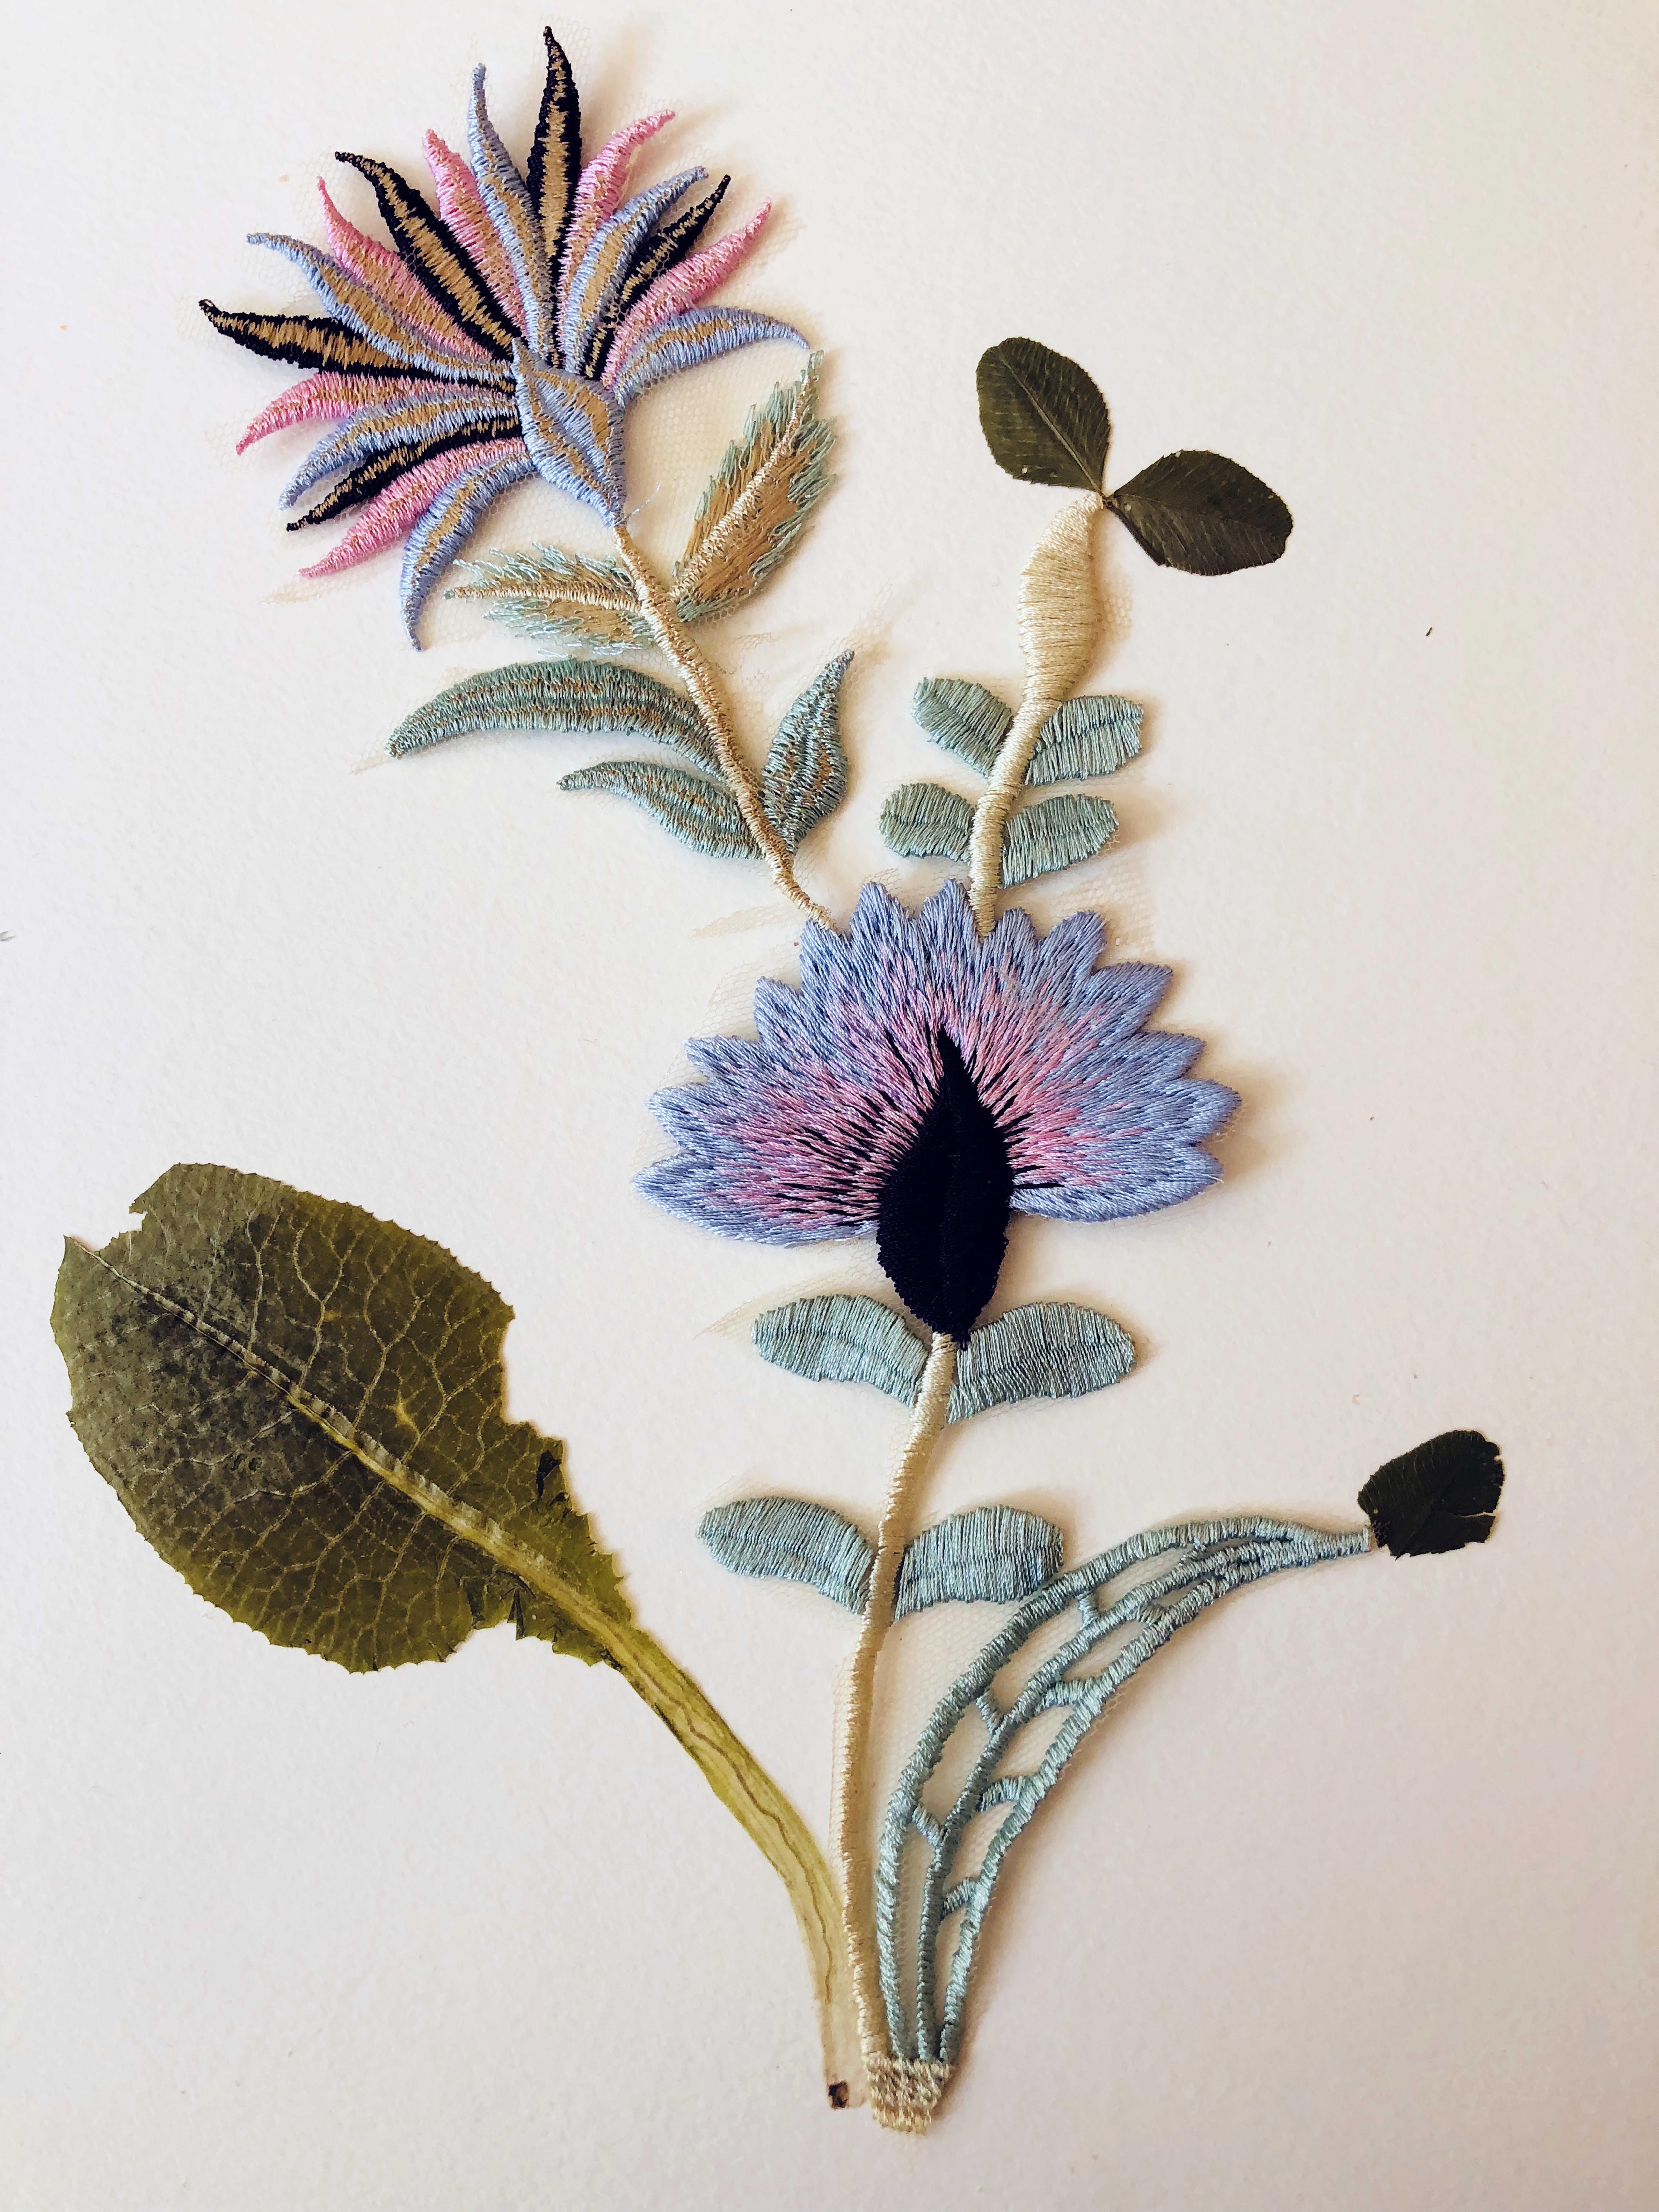 Jil Weinstock, Unwanted Collaborator (black, pink, powder blue, beige and green flower), 2020, Plant life, thread, adhesive and rag paper, 10 x 8 1/2 inches